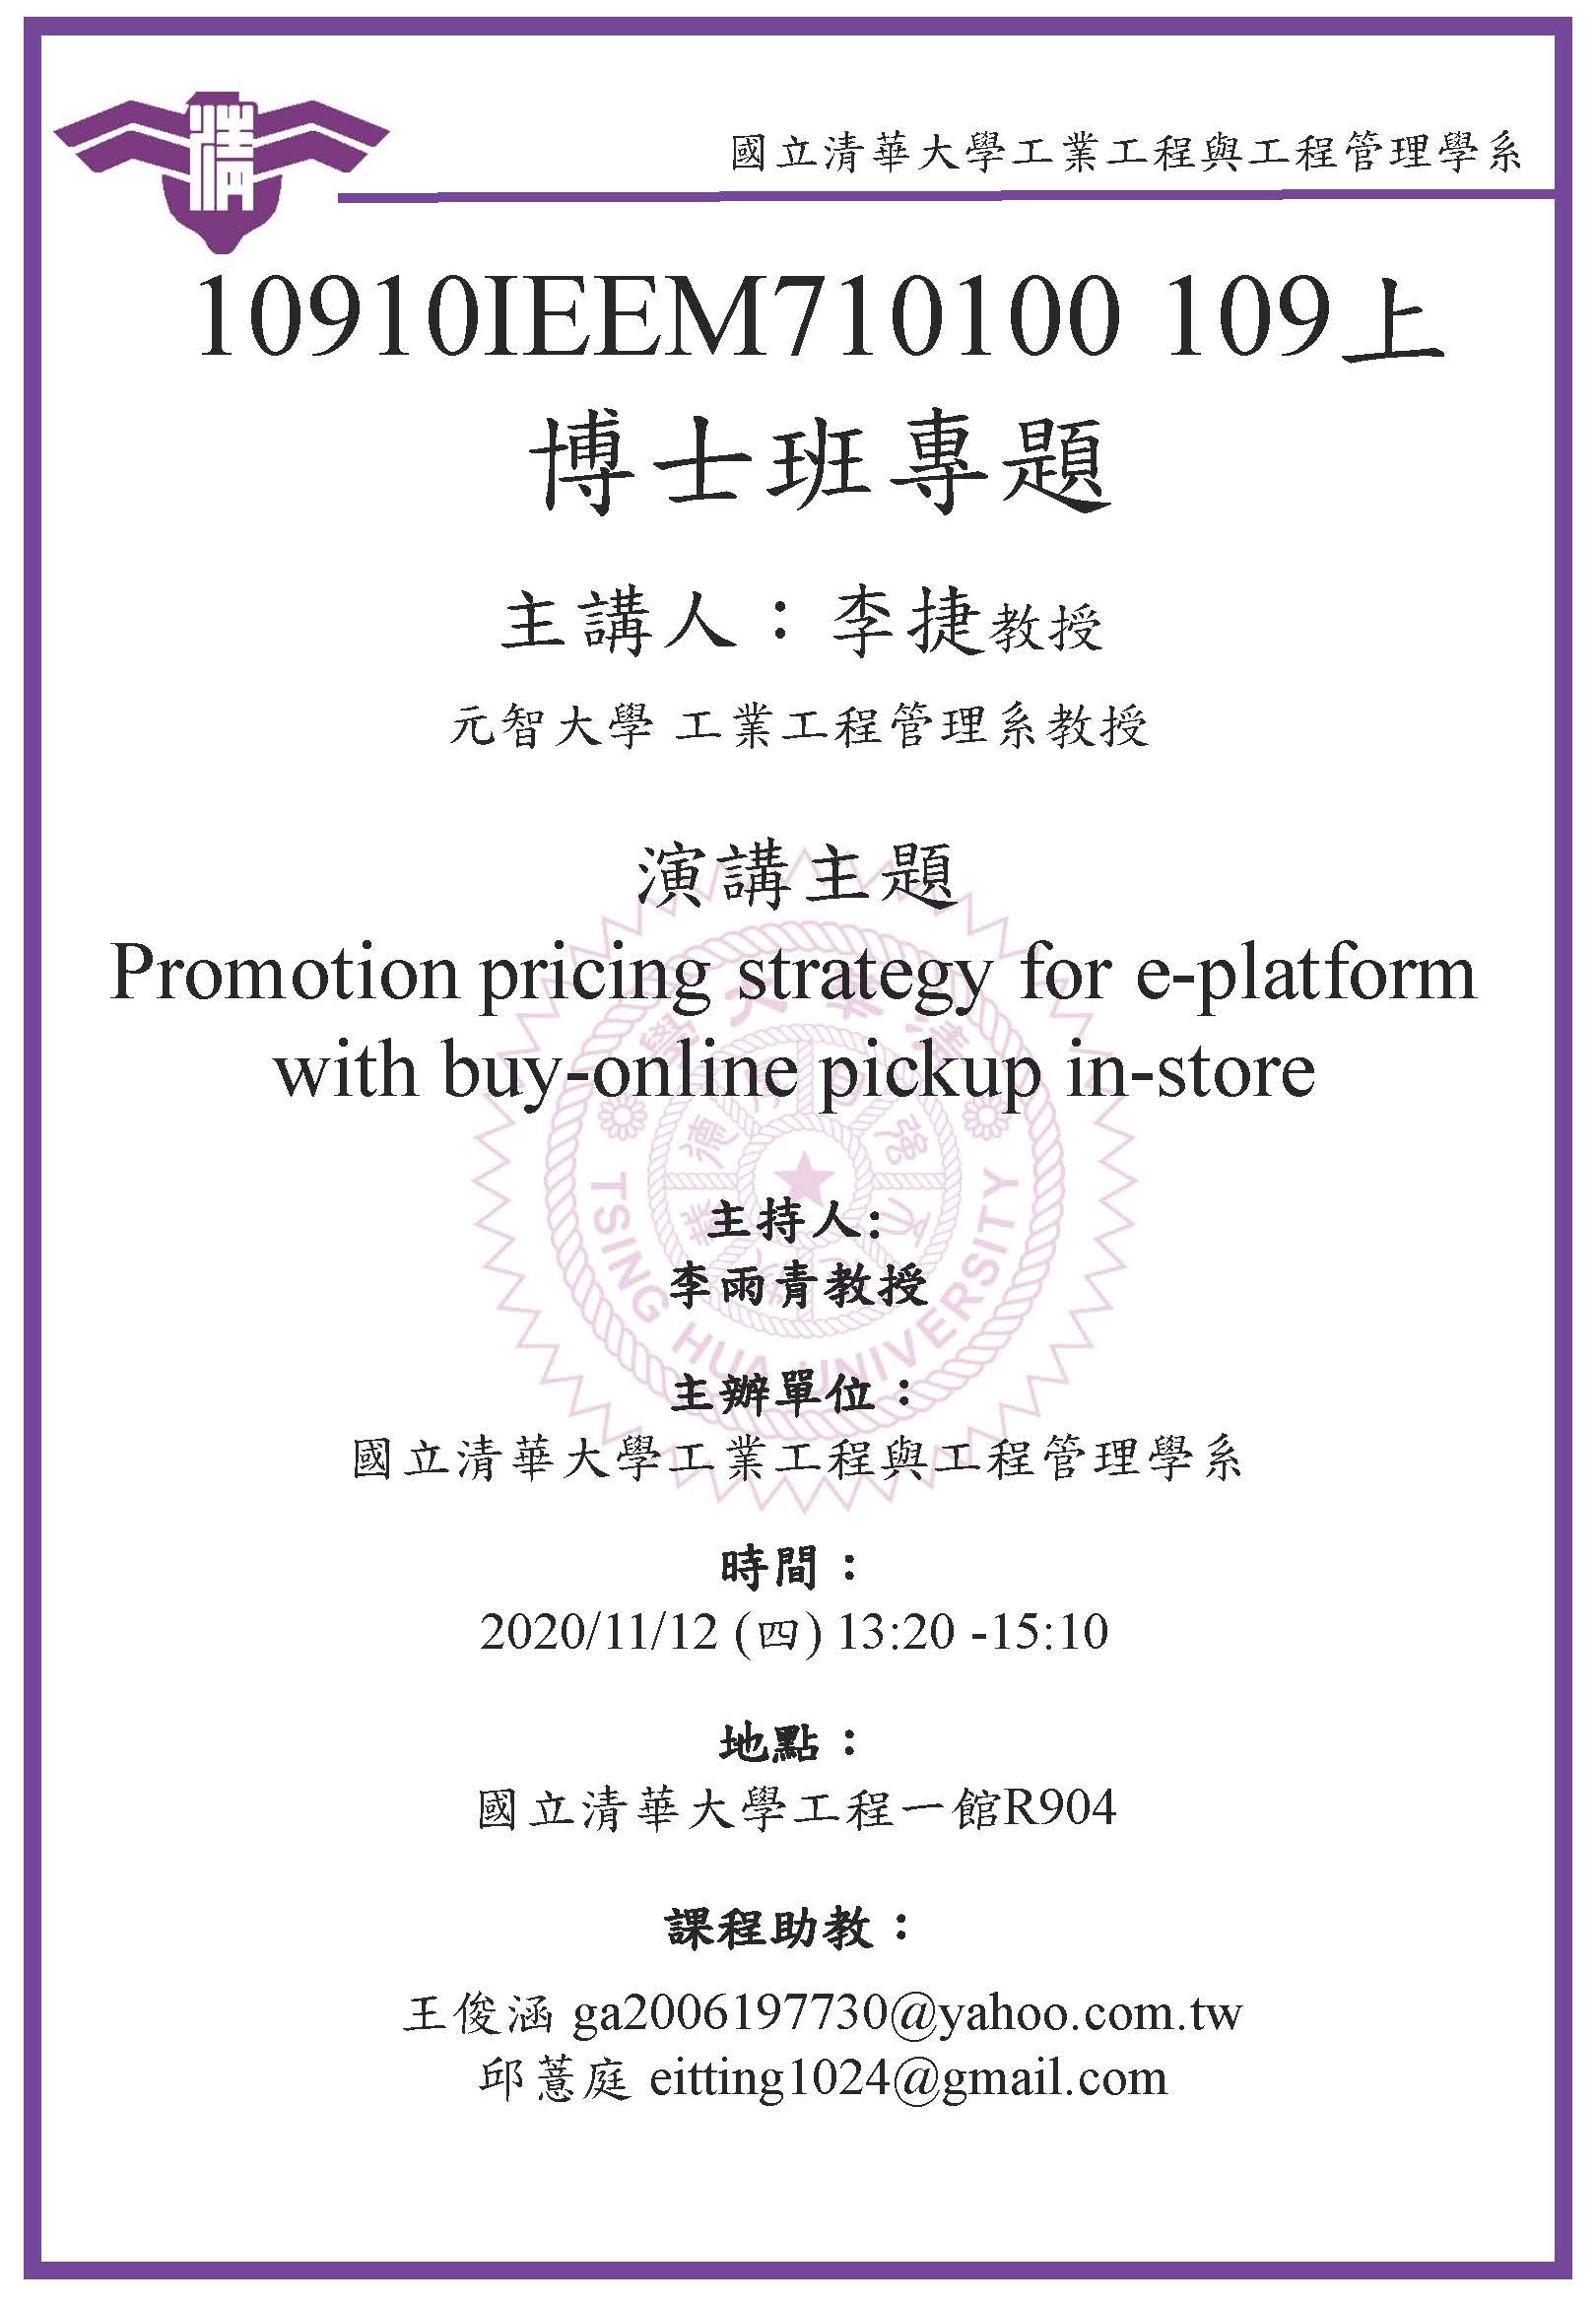 Promotion pricing strategy for e-platform with buy-online pickup in-store